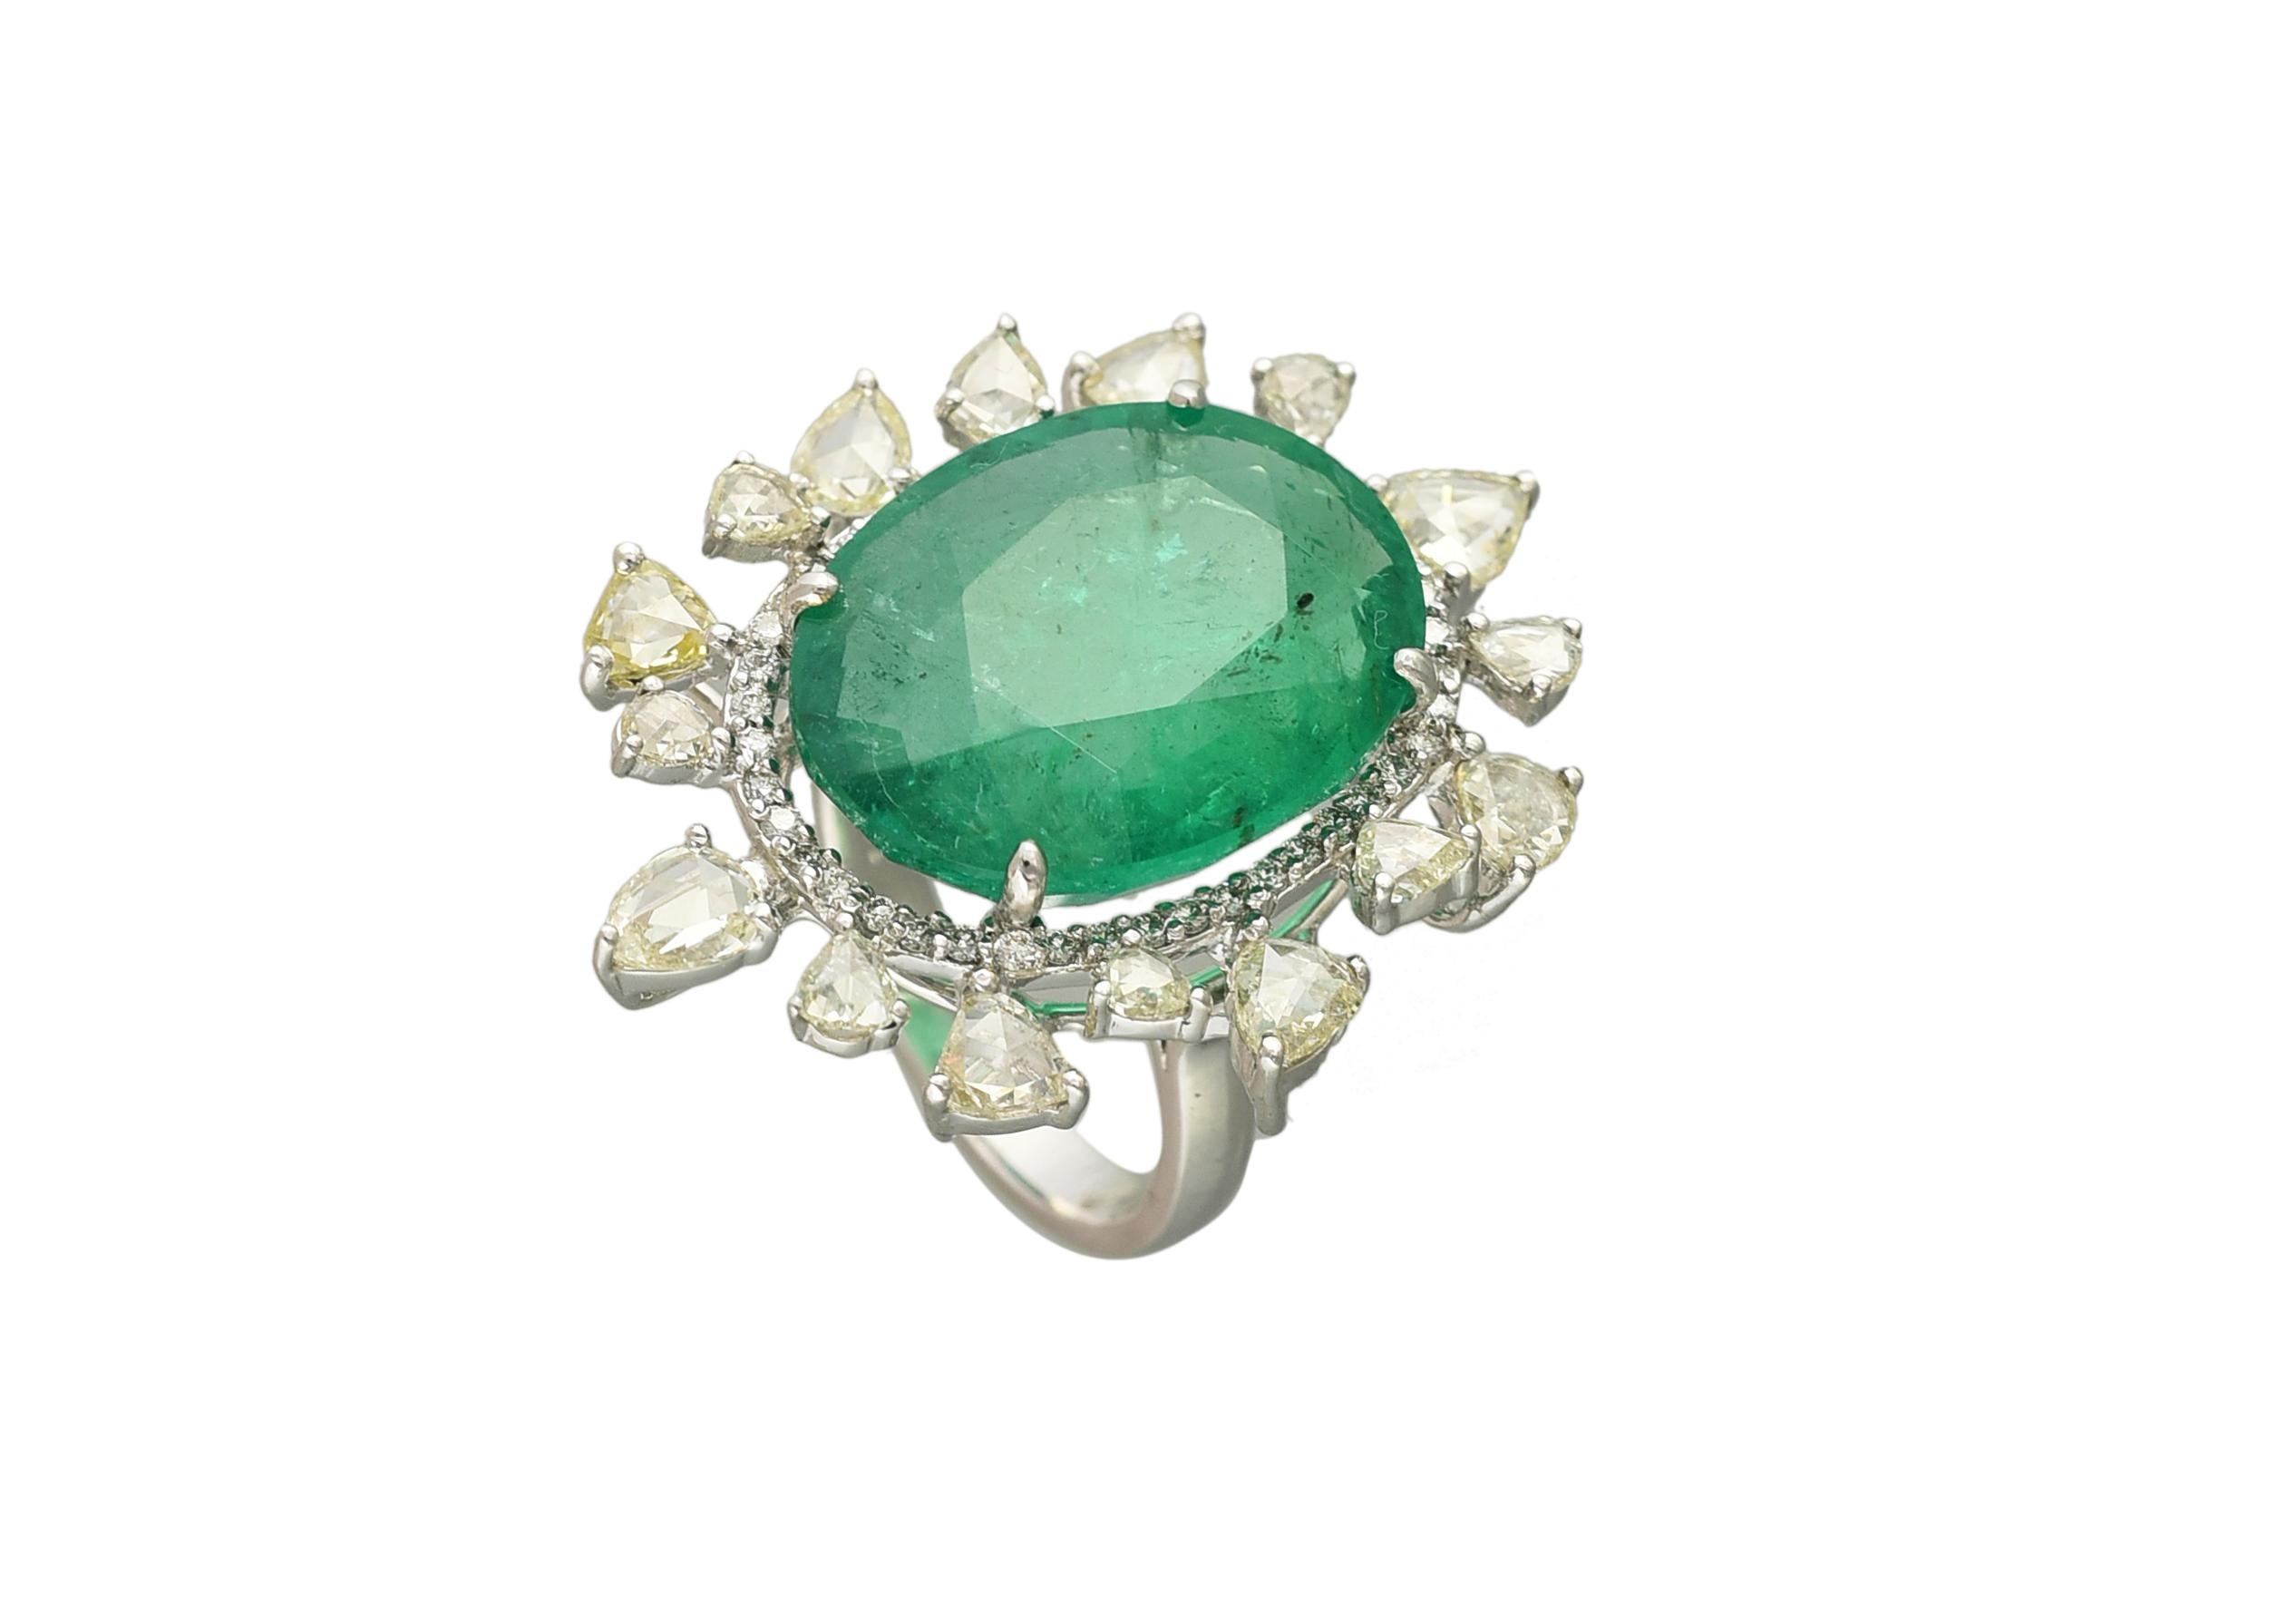 A very gorgeous Emerald Cocktail ring set in 18K white gold & Diamonds. The emerald is natural and weighs 13.70 carats. The weight of the Rose Cut Diamonds is 2.65 carats. The dimensions of the ring are 2.00cm x 1.50cm x 1.00cm (L x W x D). The ring